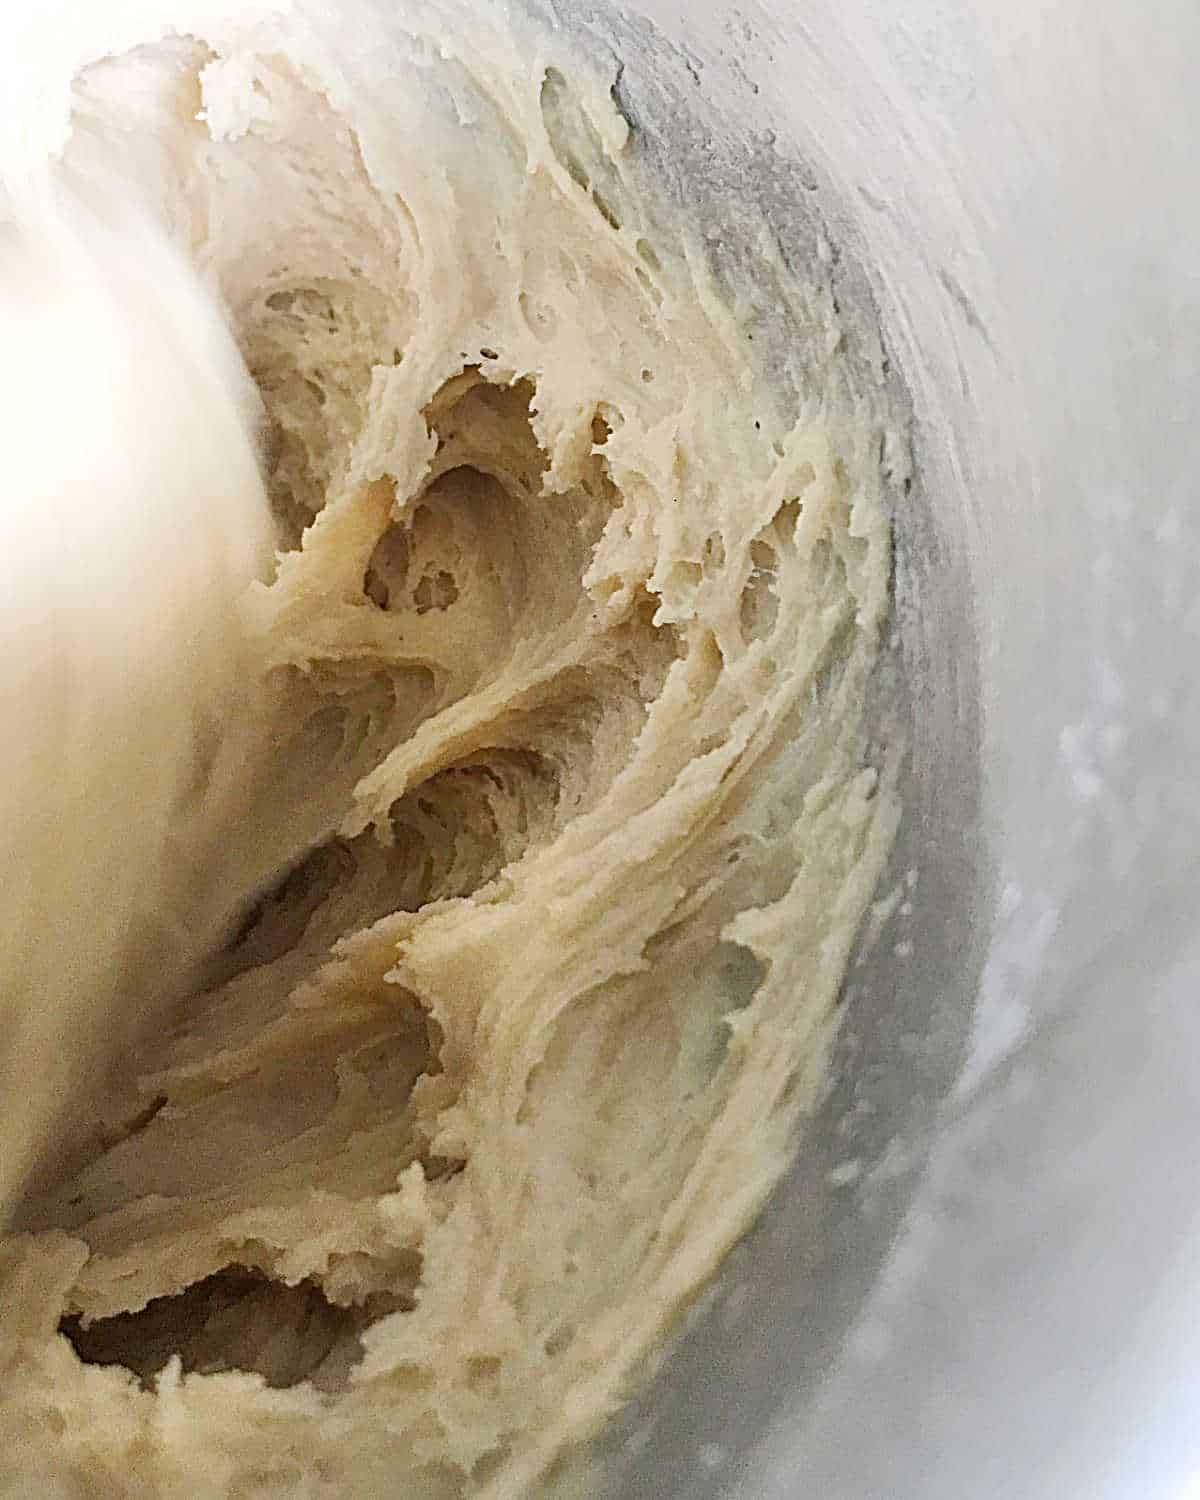 Sweet buns dough being mixed in a metal bowl of a stand mixer. Close up image.